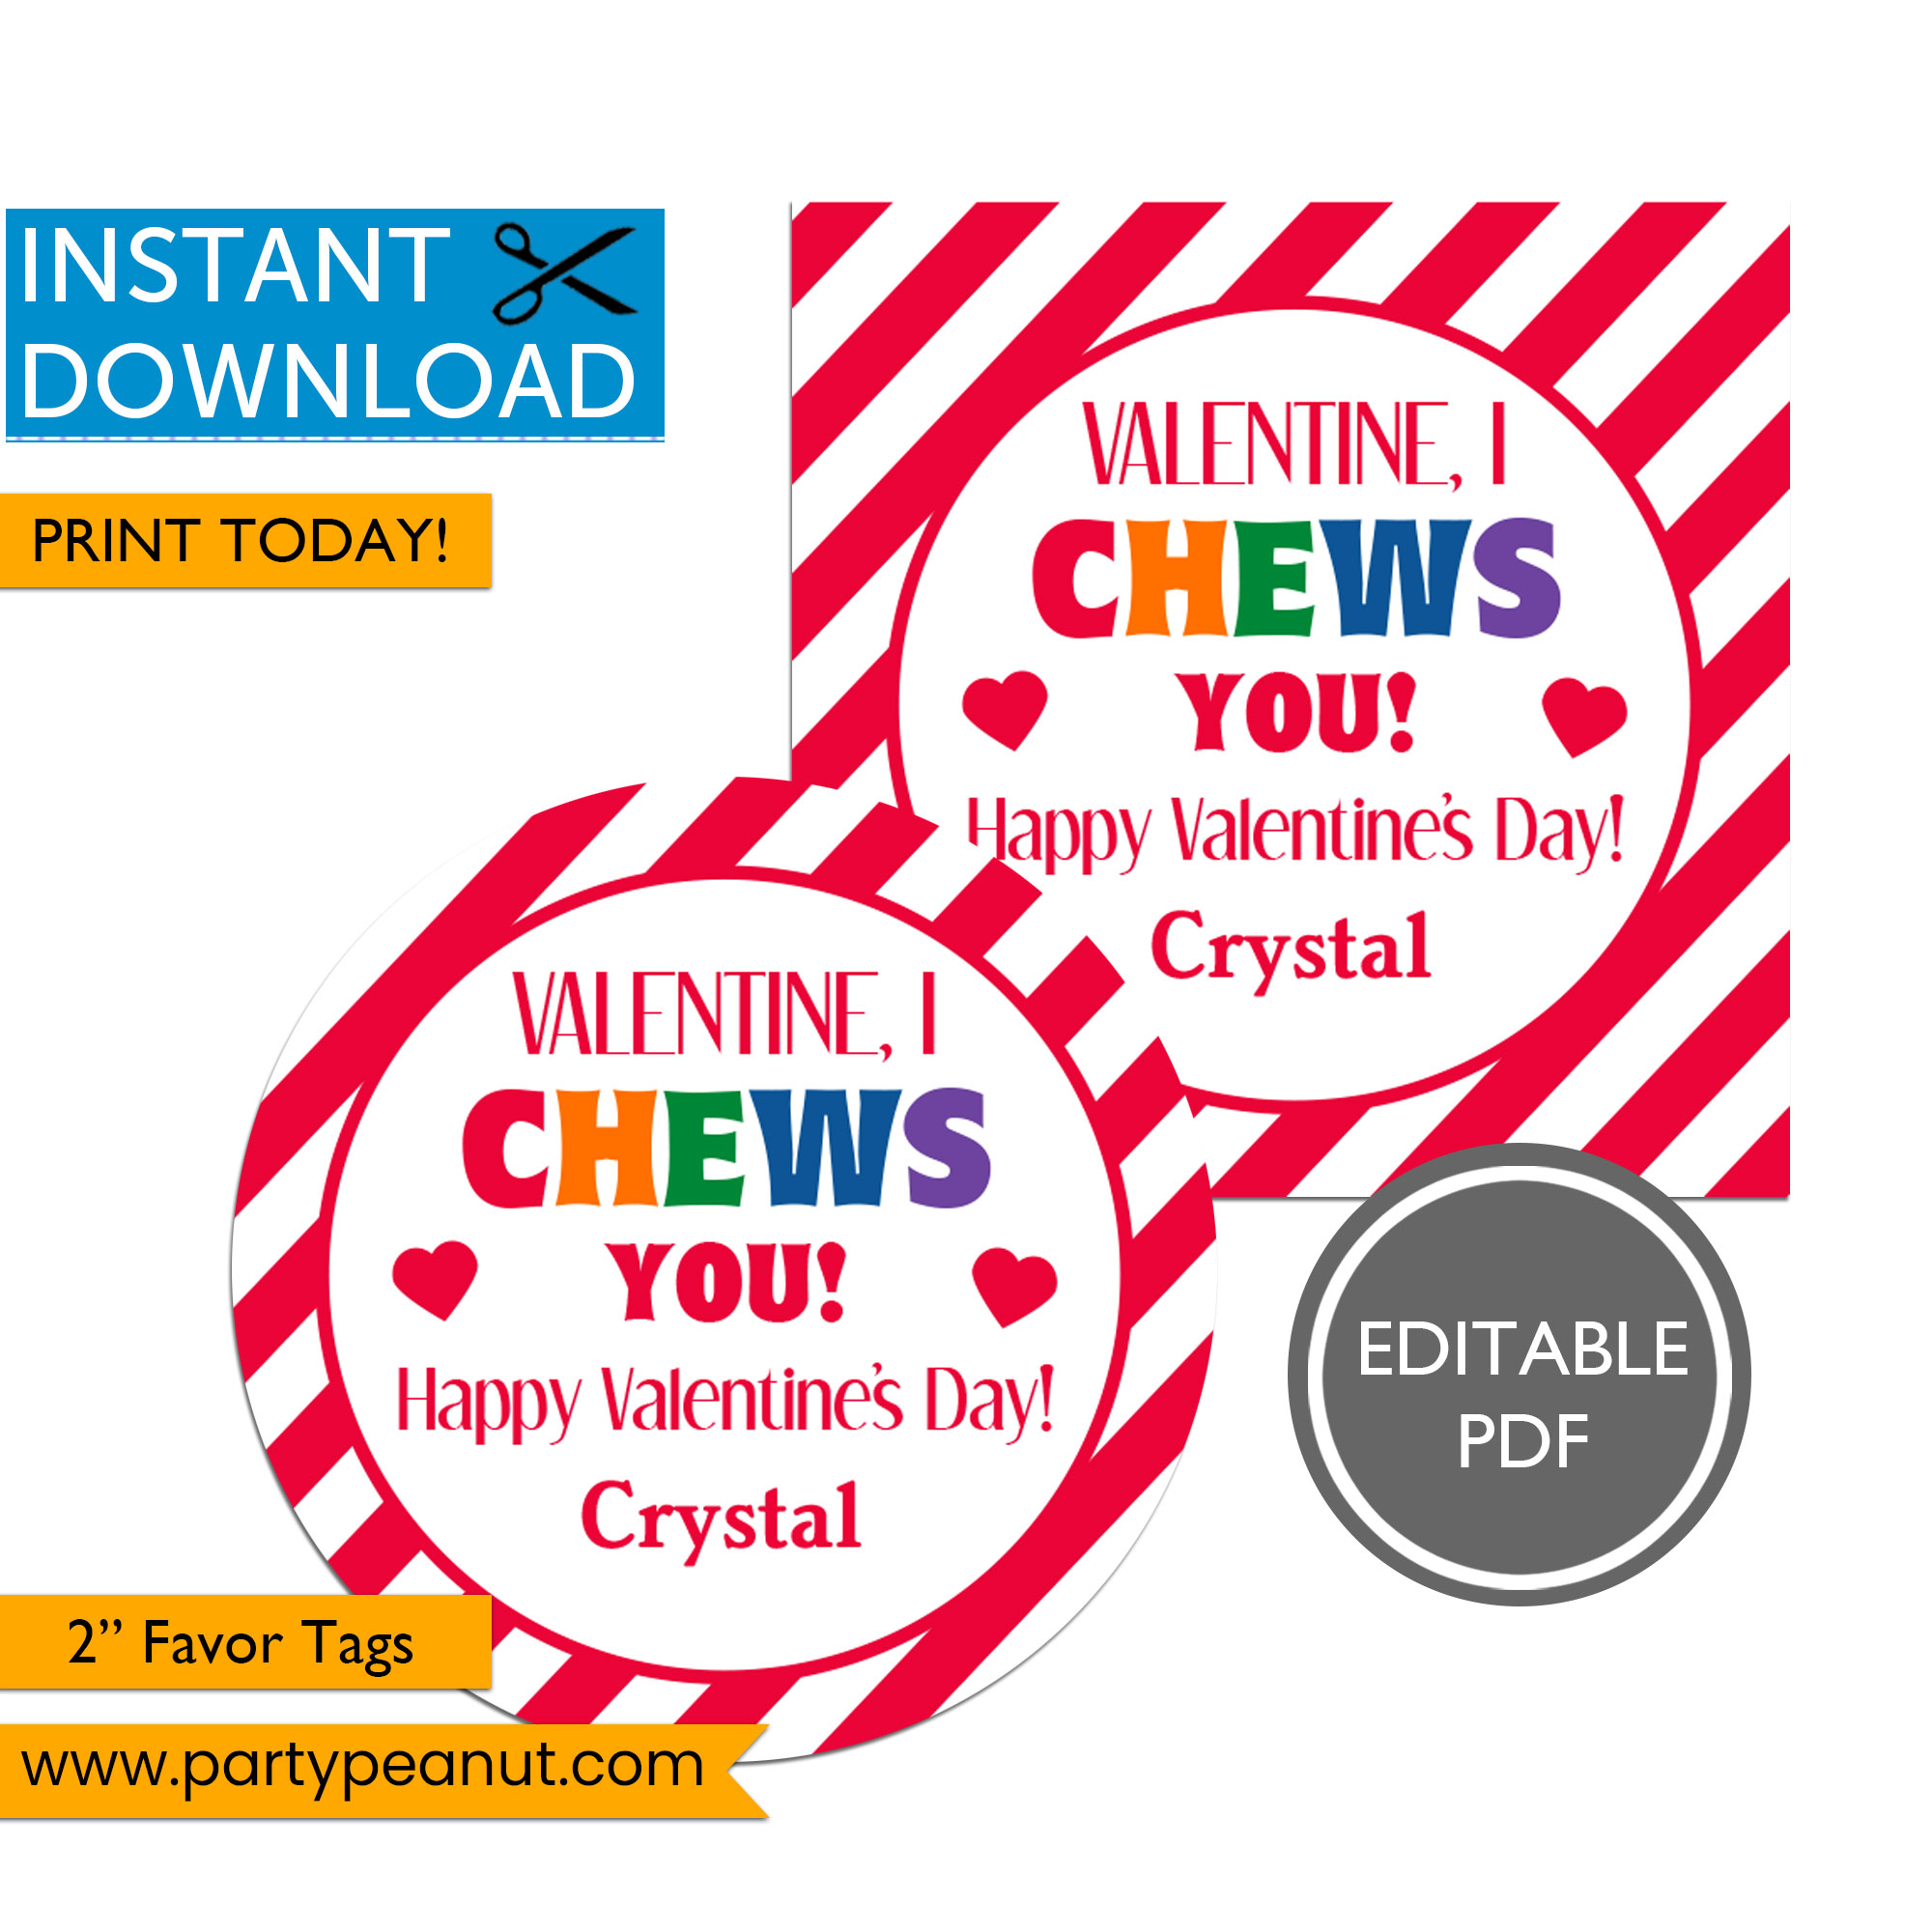 Valentine I Chews You Favor Tags Party Peanut Party printables